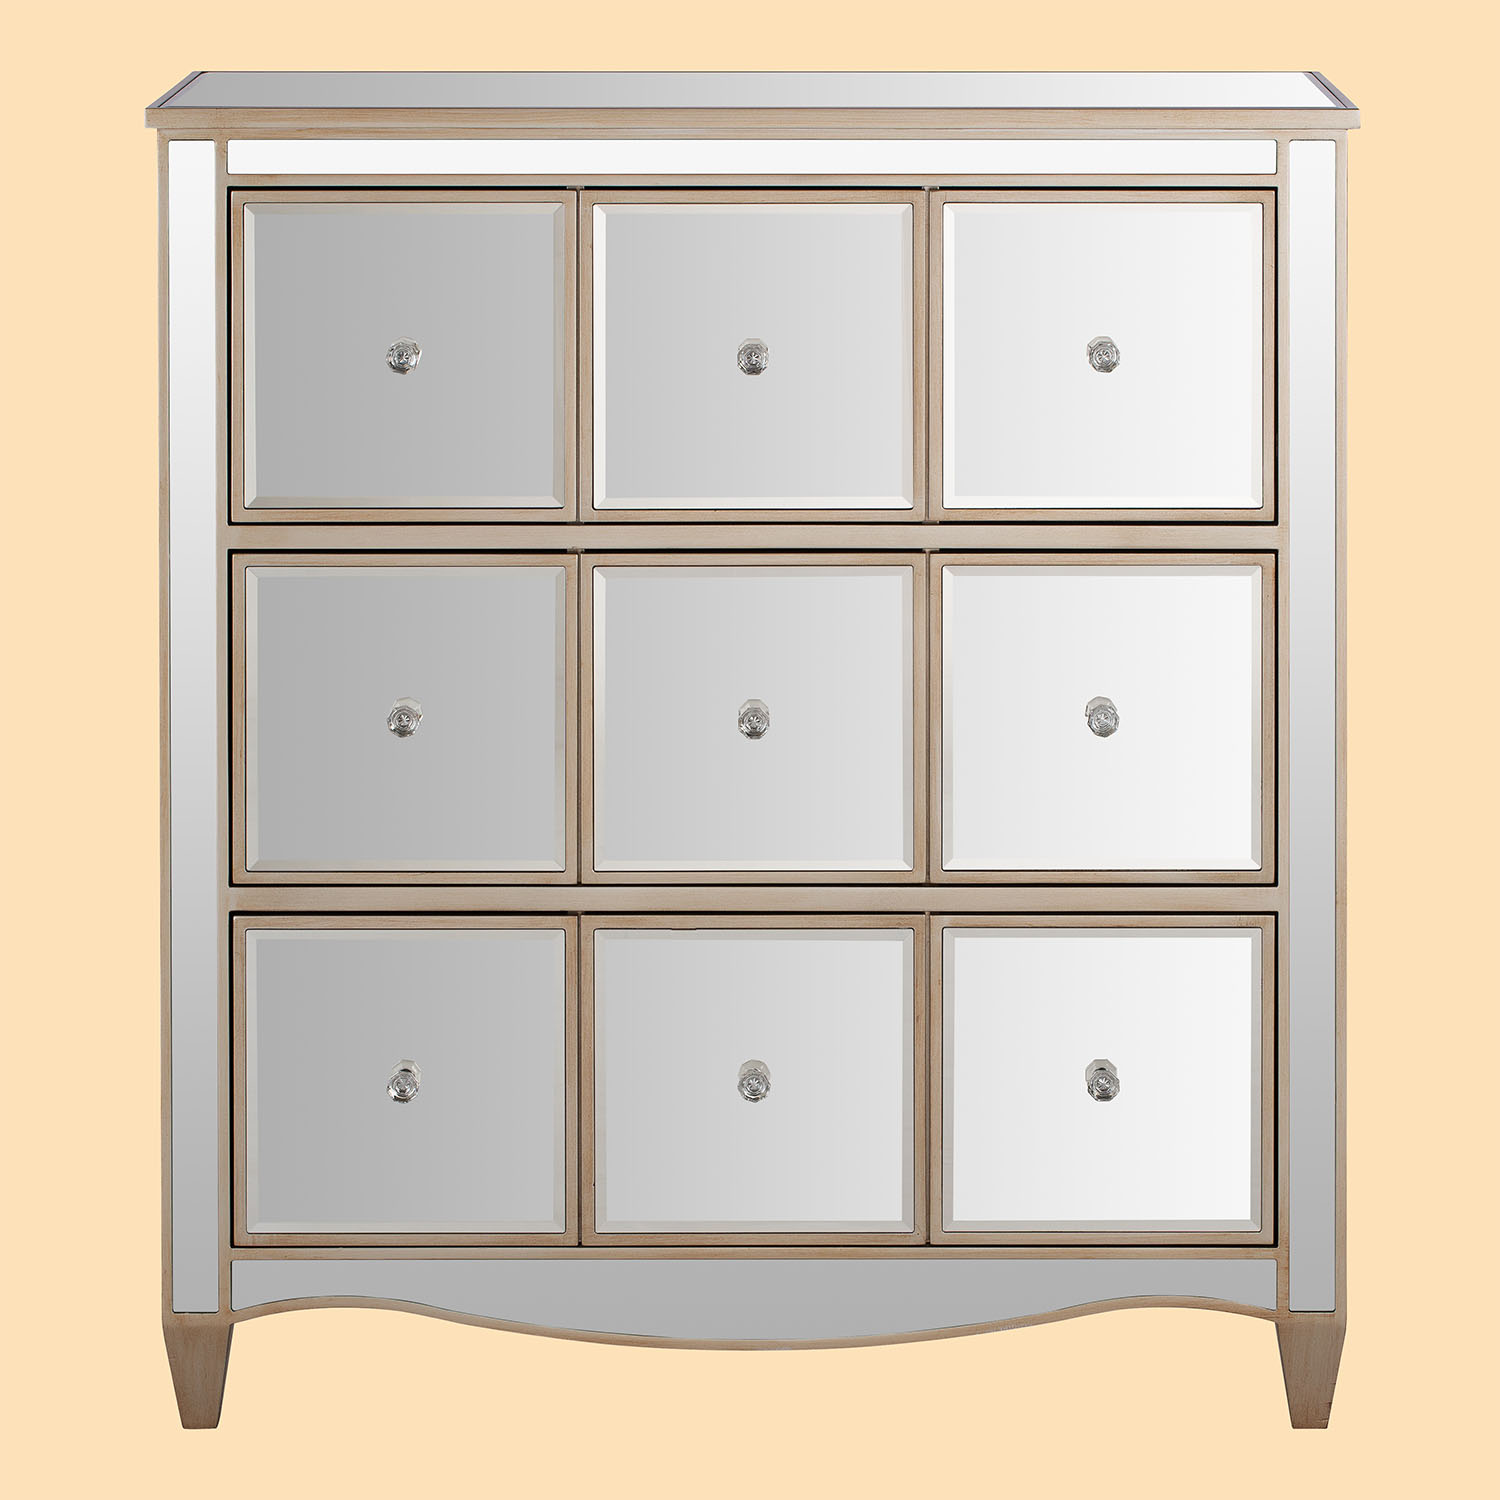 Mirrored drawer chest furniture product